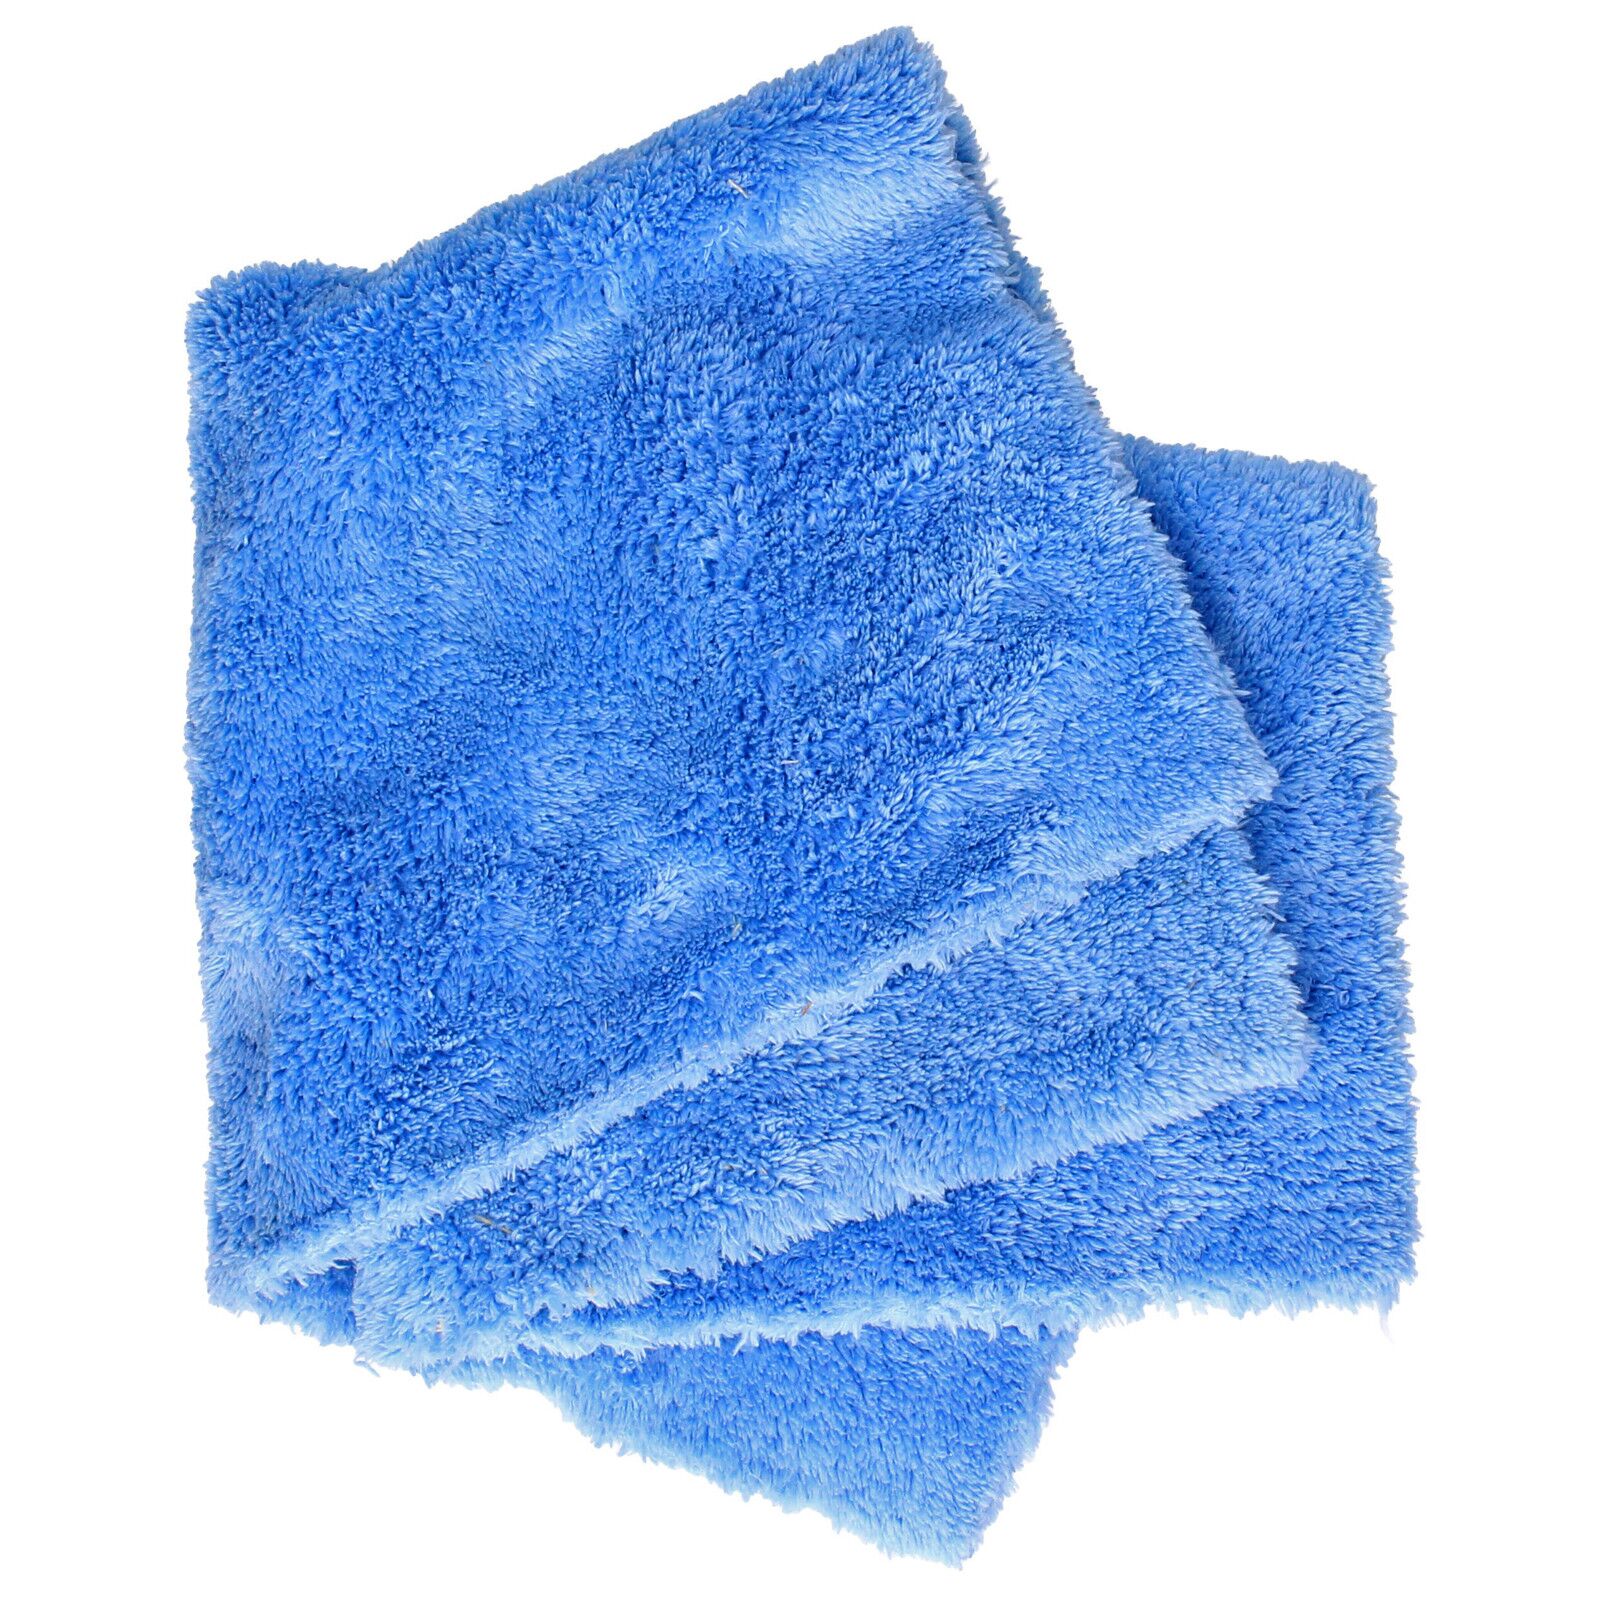 Joest - Microfiber Cloth - Soft and Dry